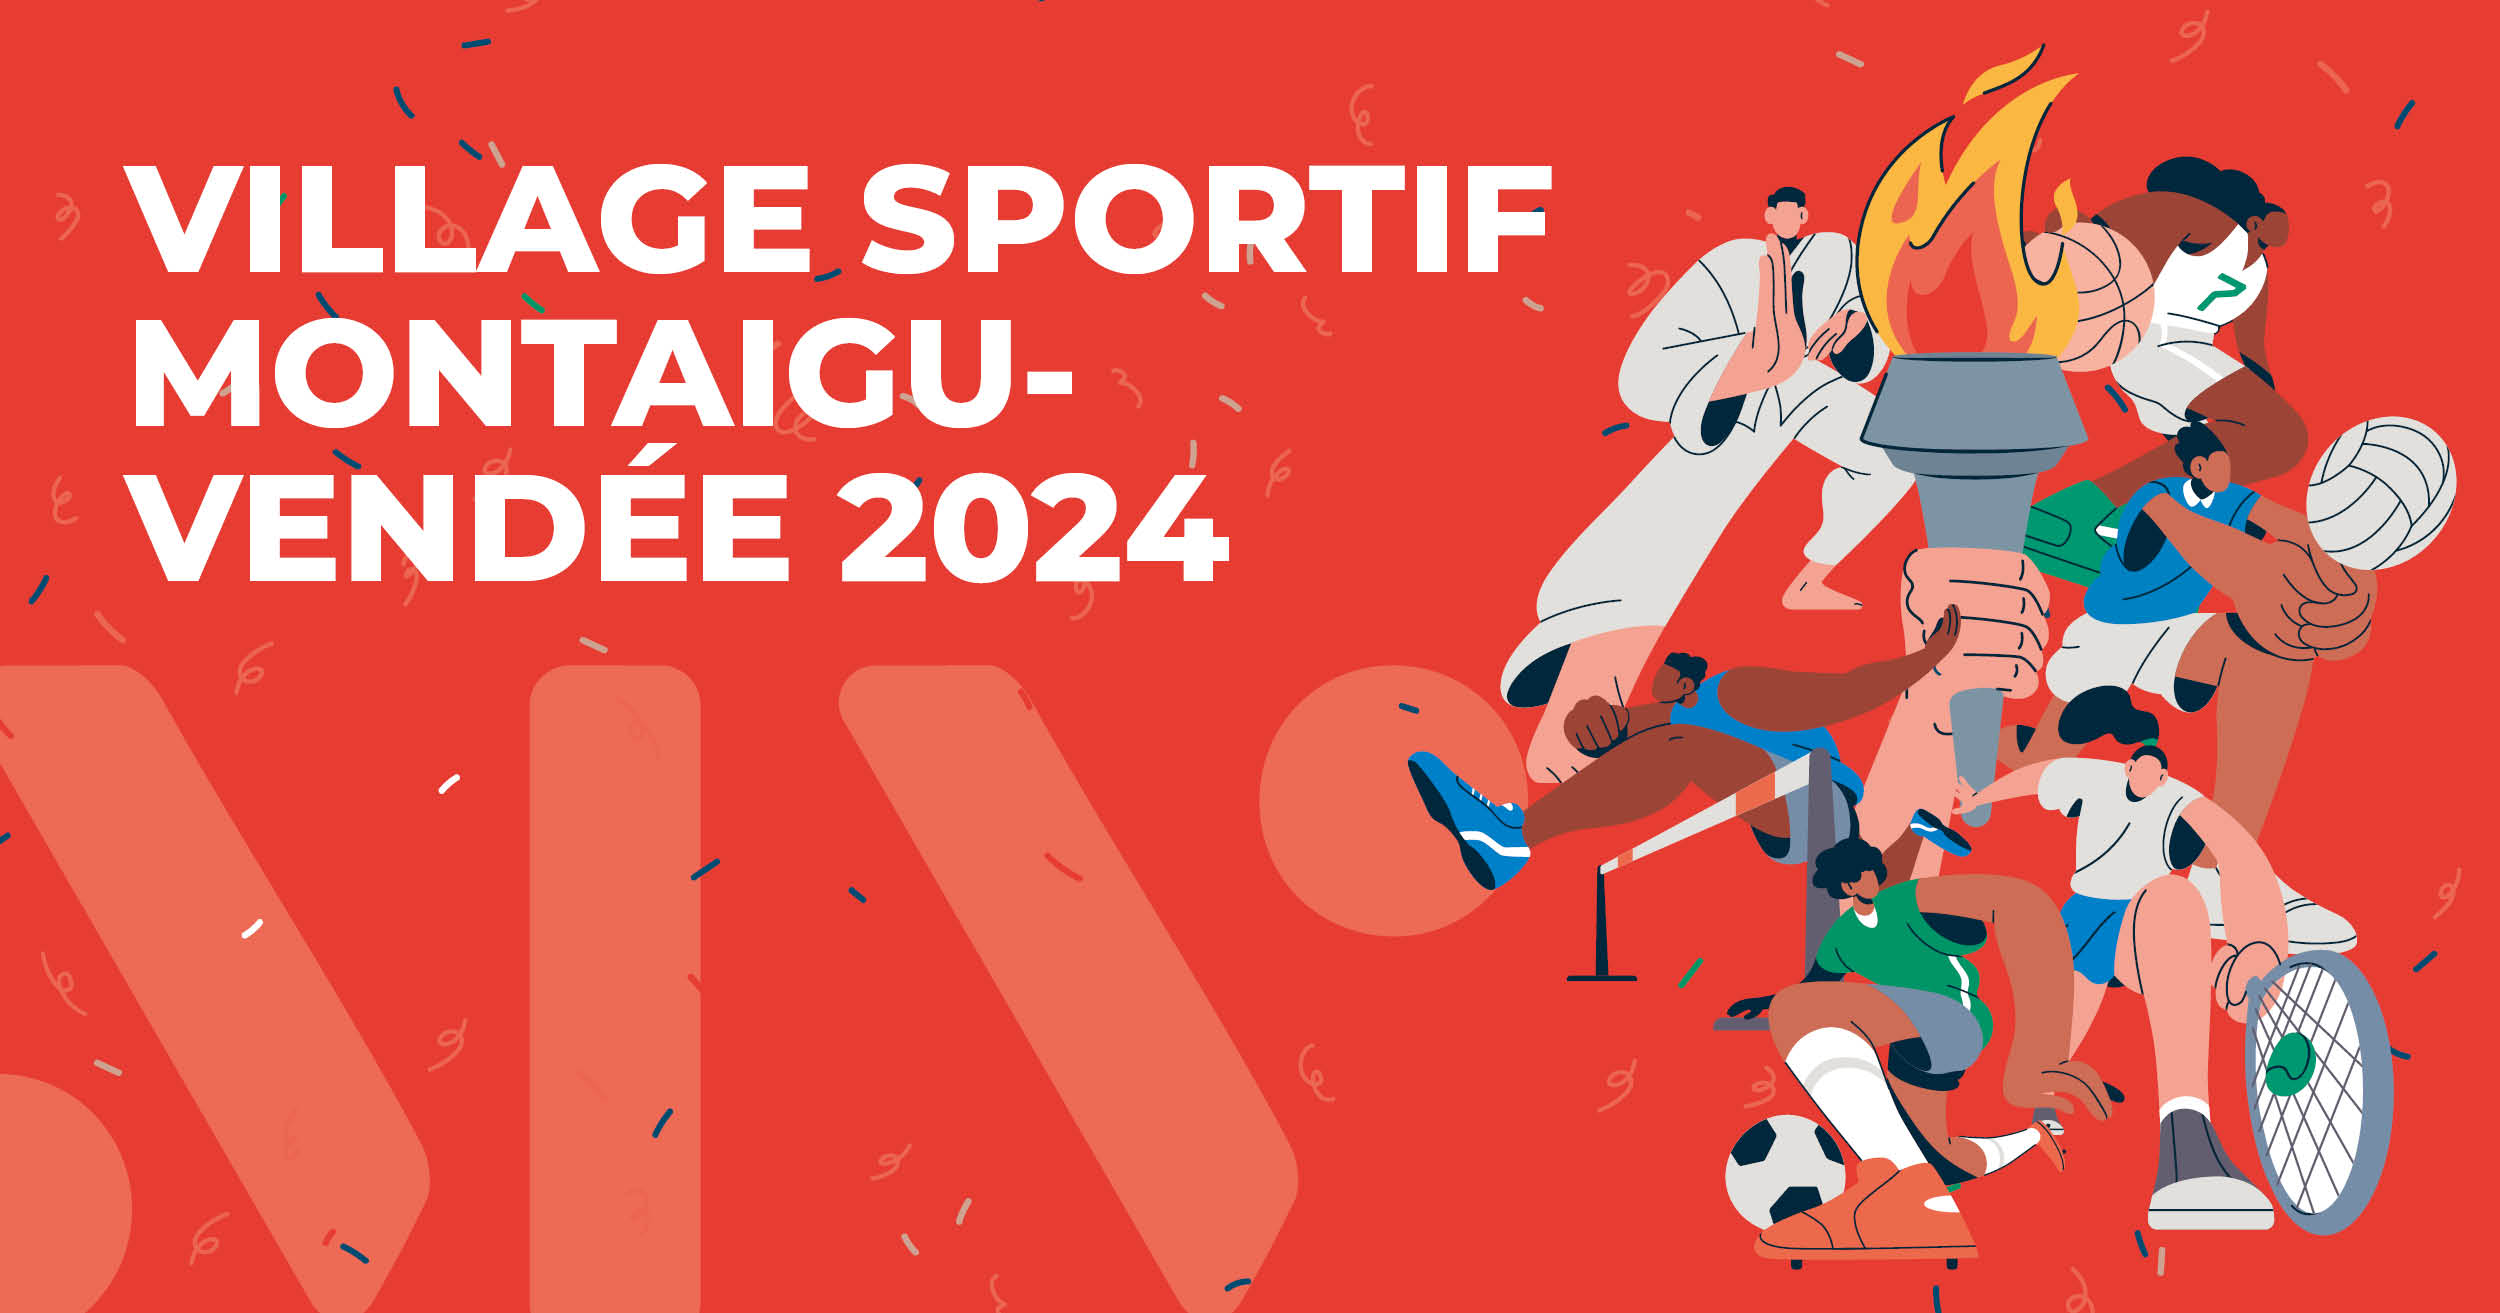 Montaigu-Vendée Sports Village 2024: a weekend dedicated to the discovery of sports